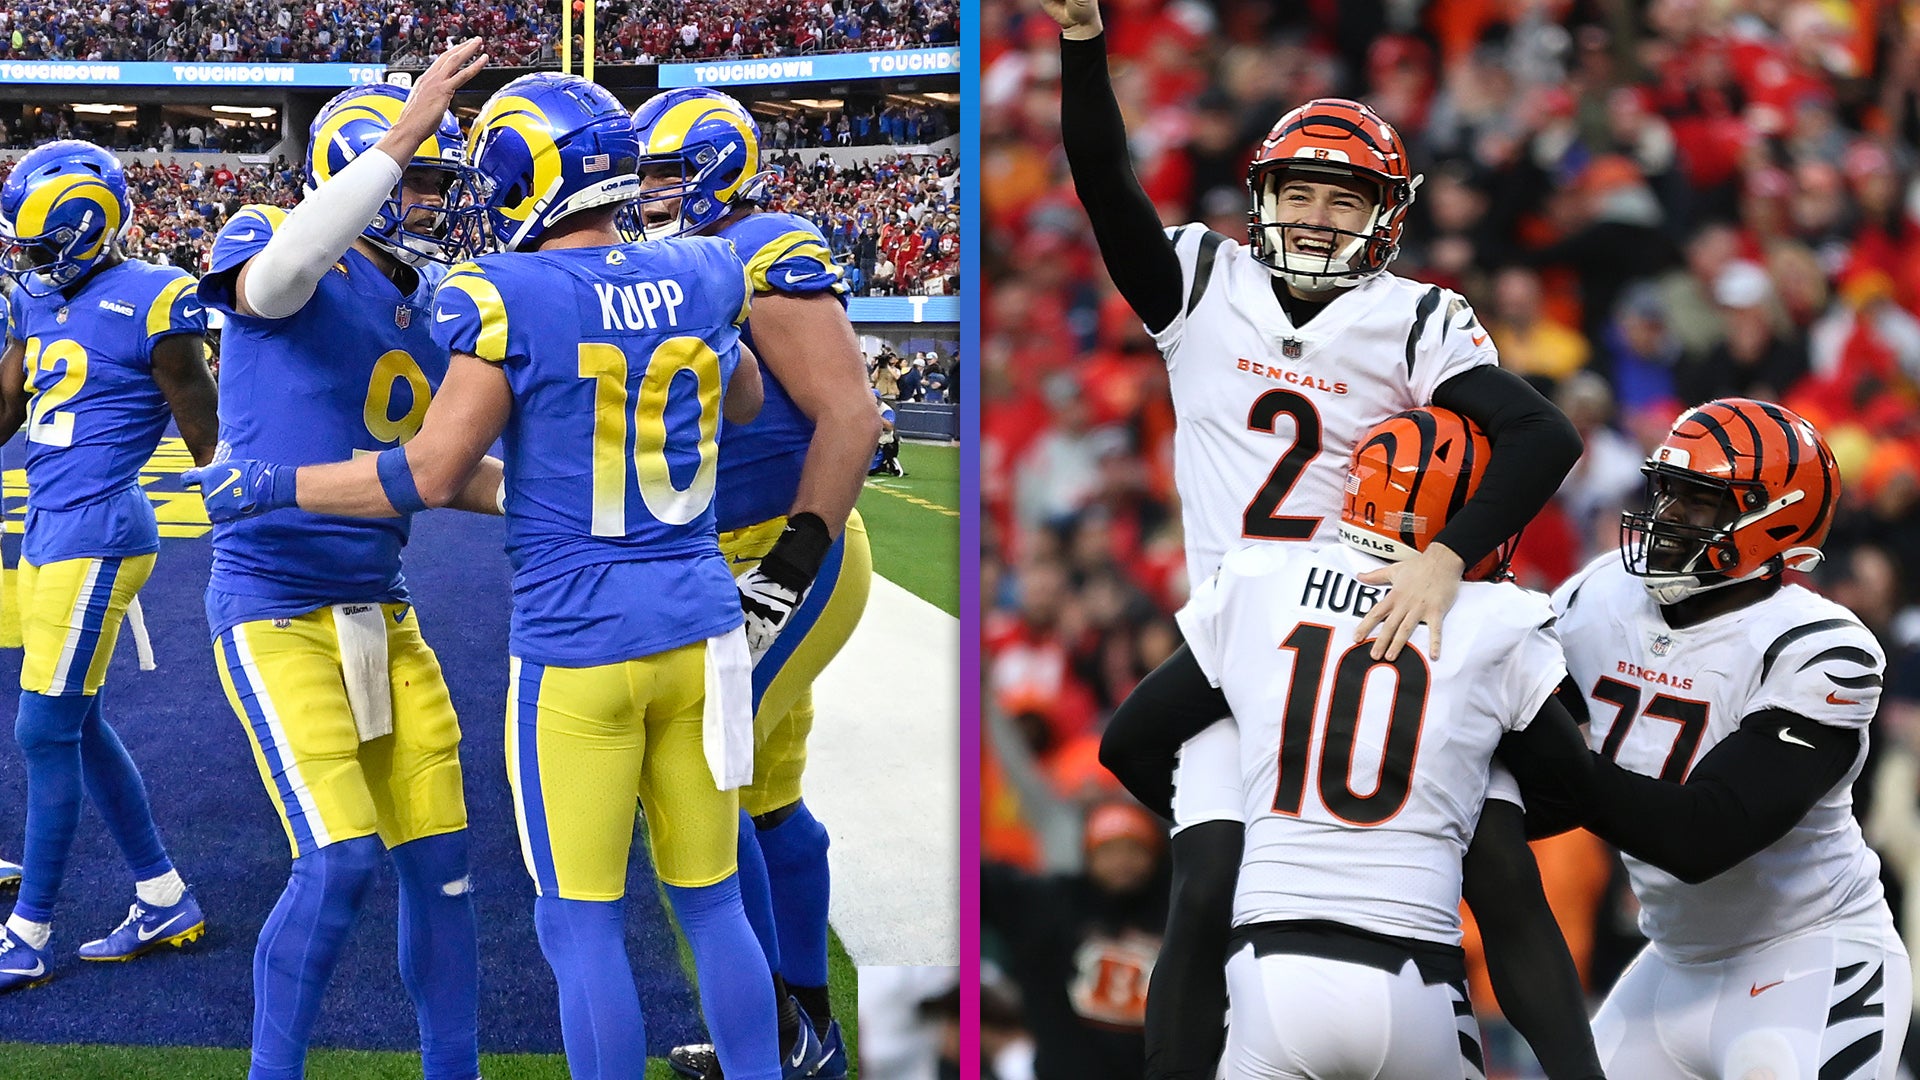 Super Bowl 2022: How to Watch the Bengals vs. Rams Game, Halftime